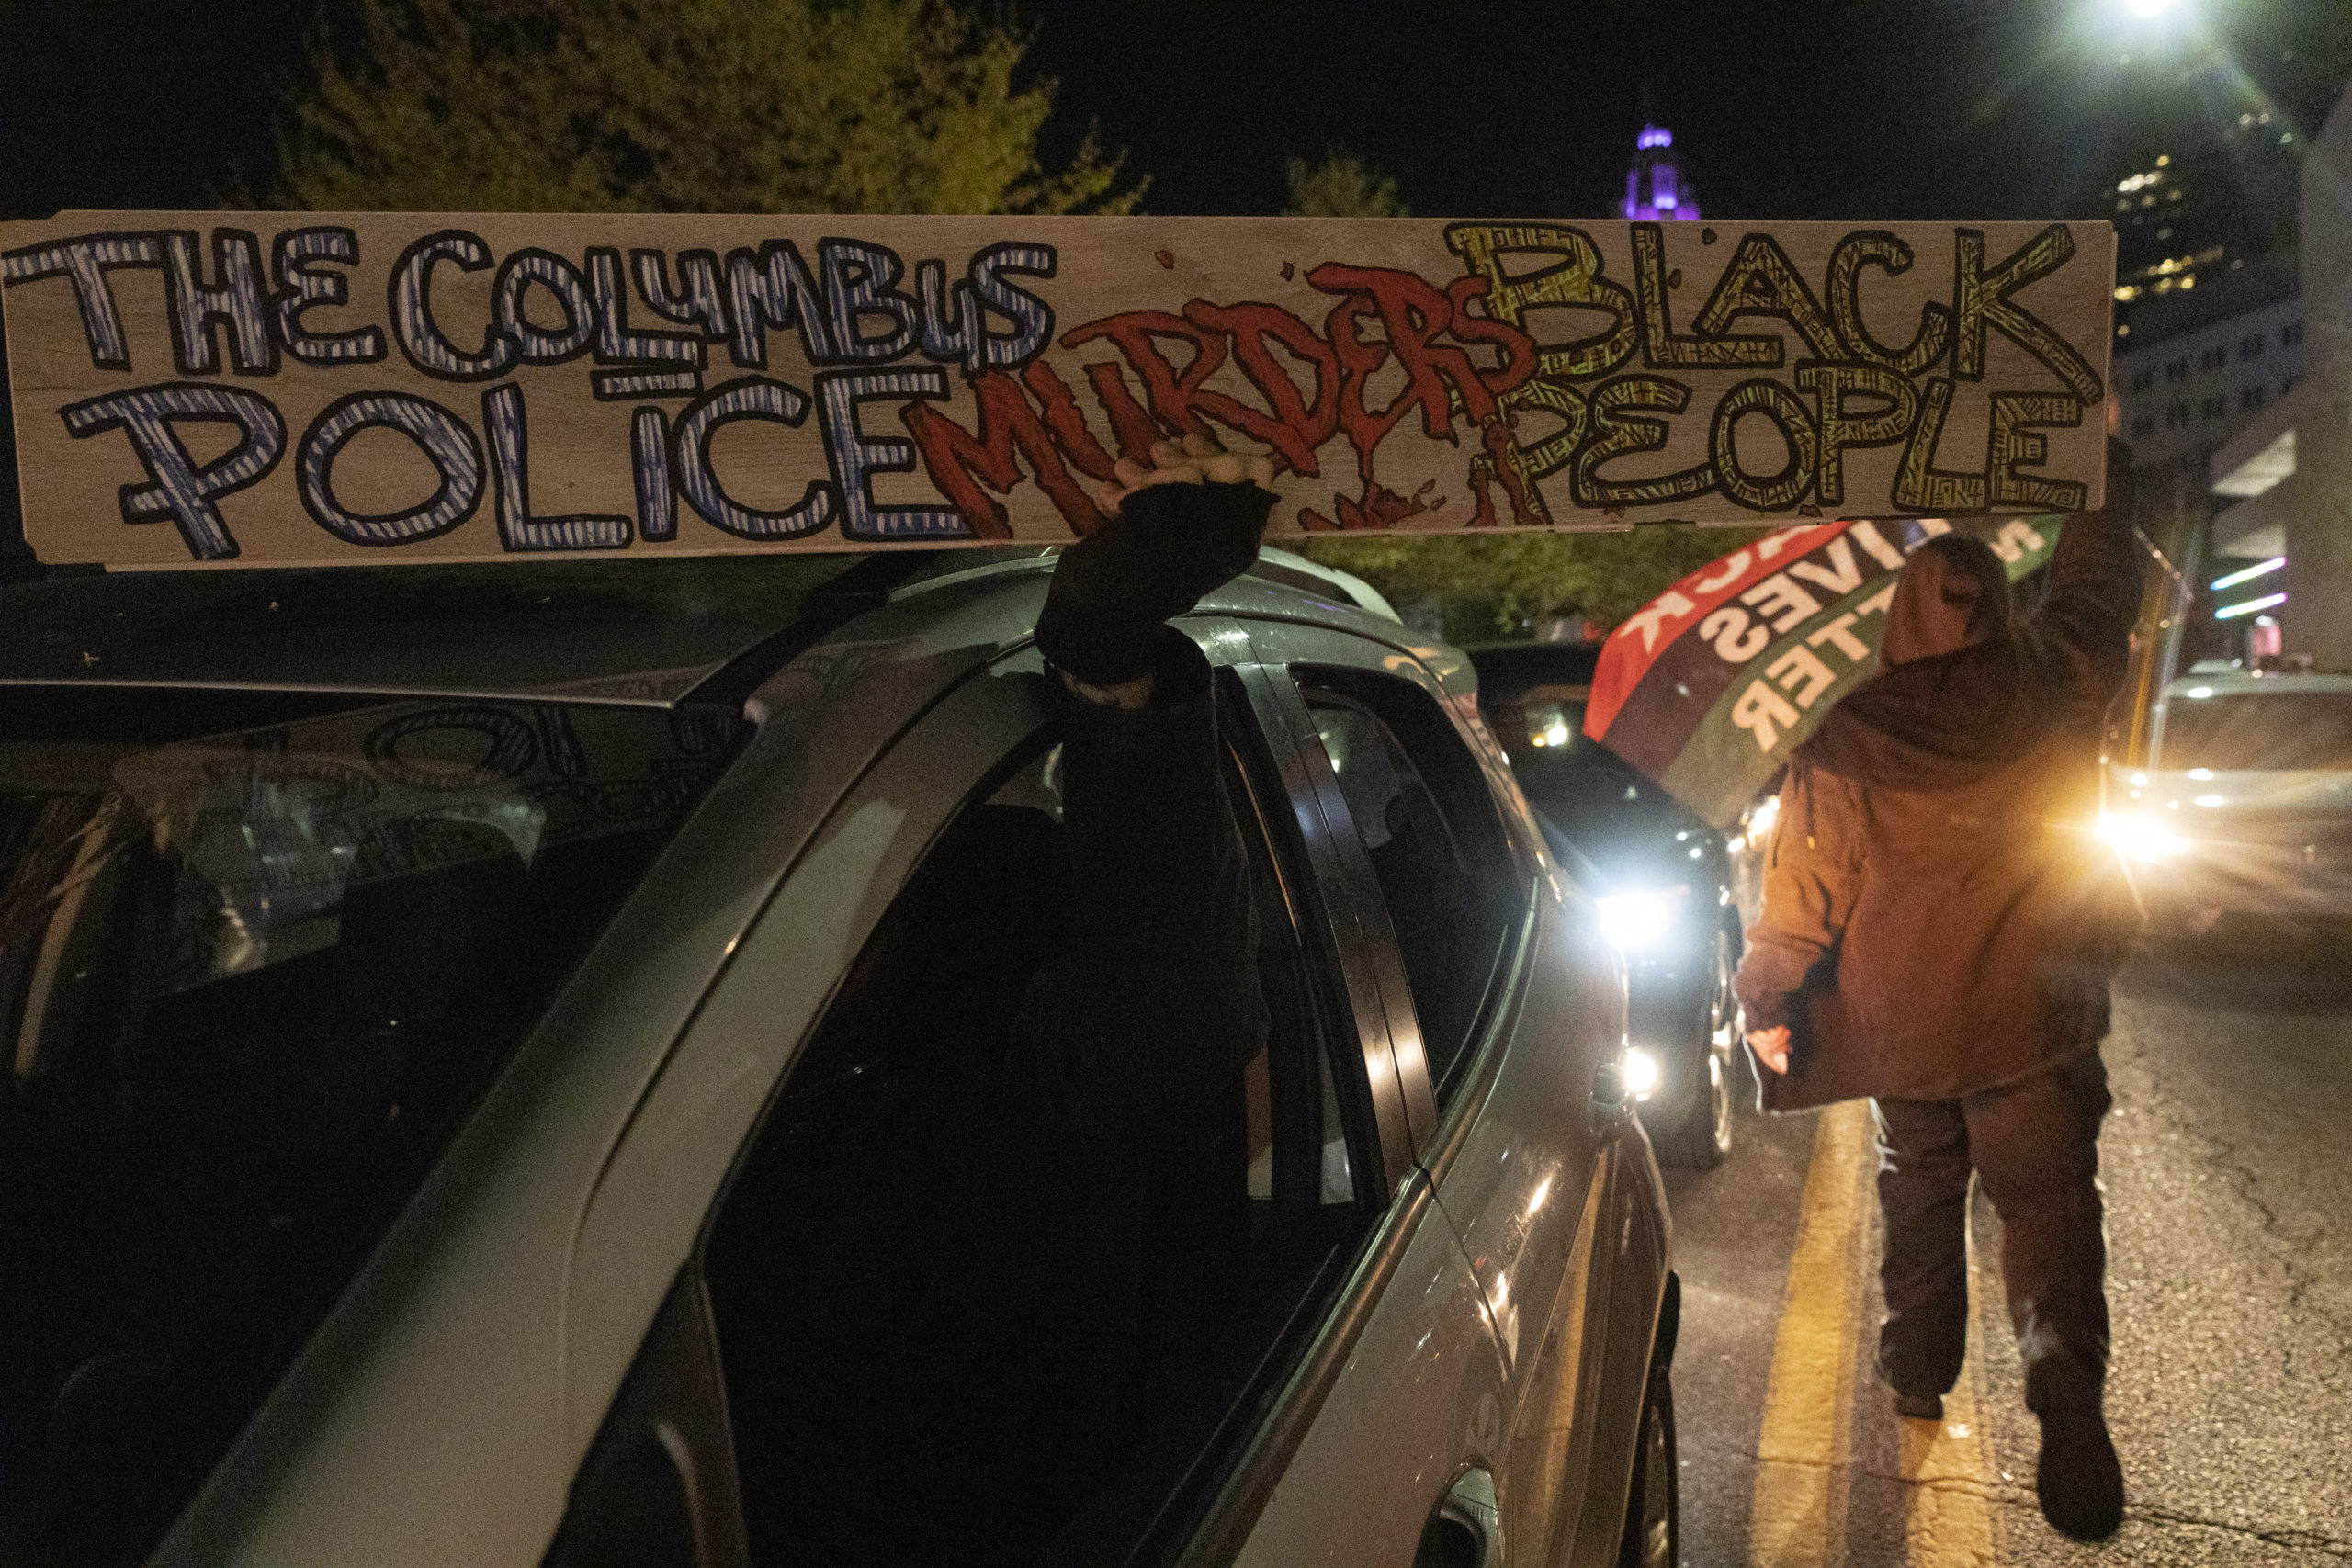 Black Lives Matter activists hold a sign condemning police brutality in Columbus during a protest in reaction to the police shooting of Ma'Khia Bryant. (Stephen Zenner/Getty Images)